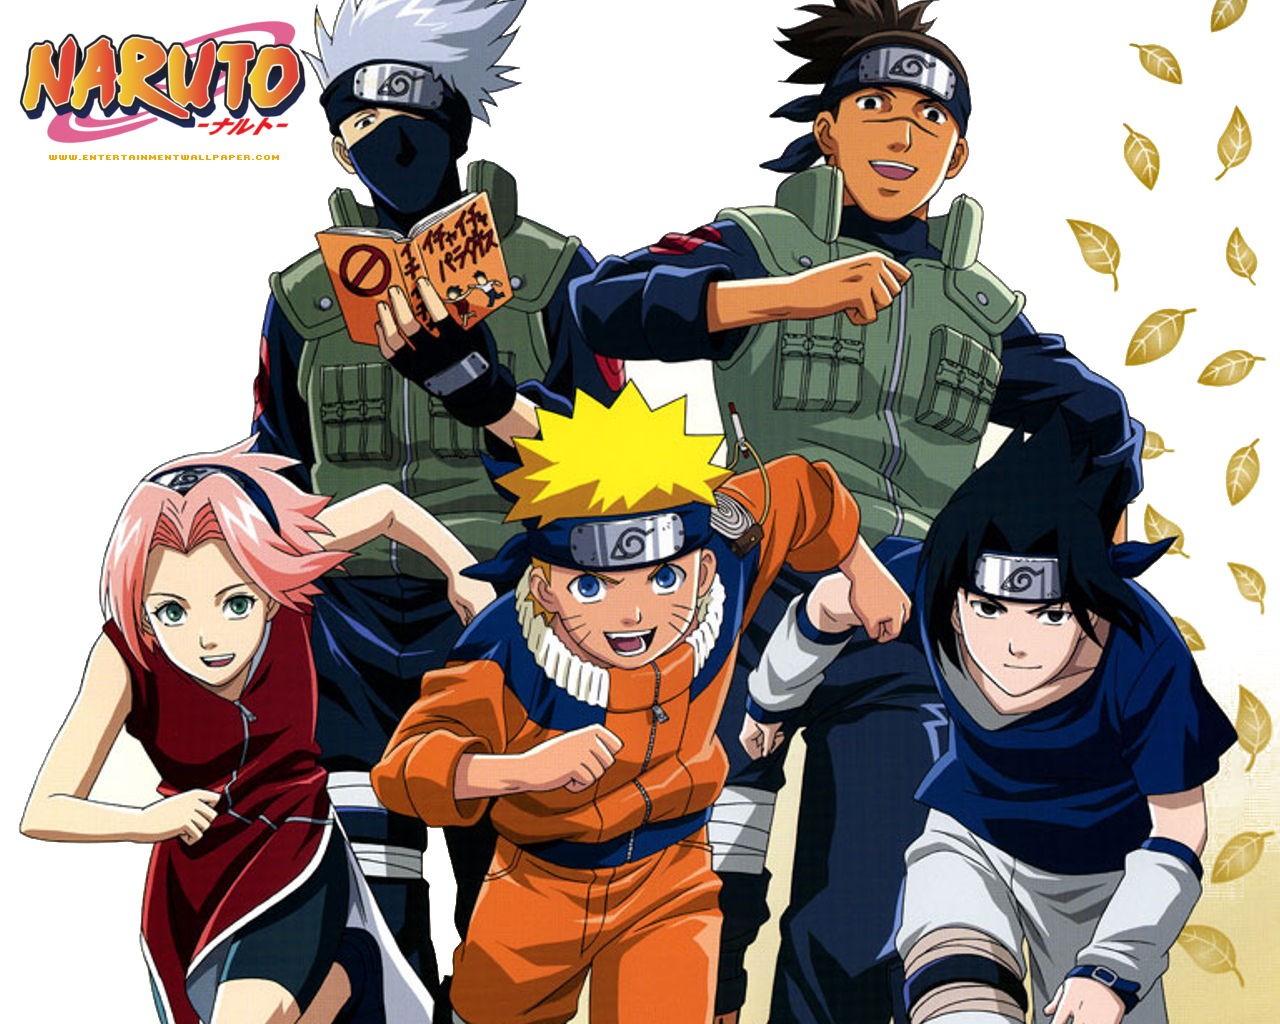 Naruto Widescreen Wallpaper Is A Great For Your Puter